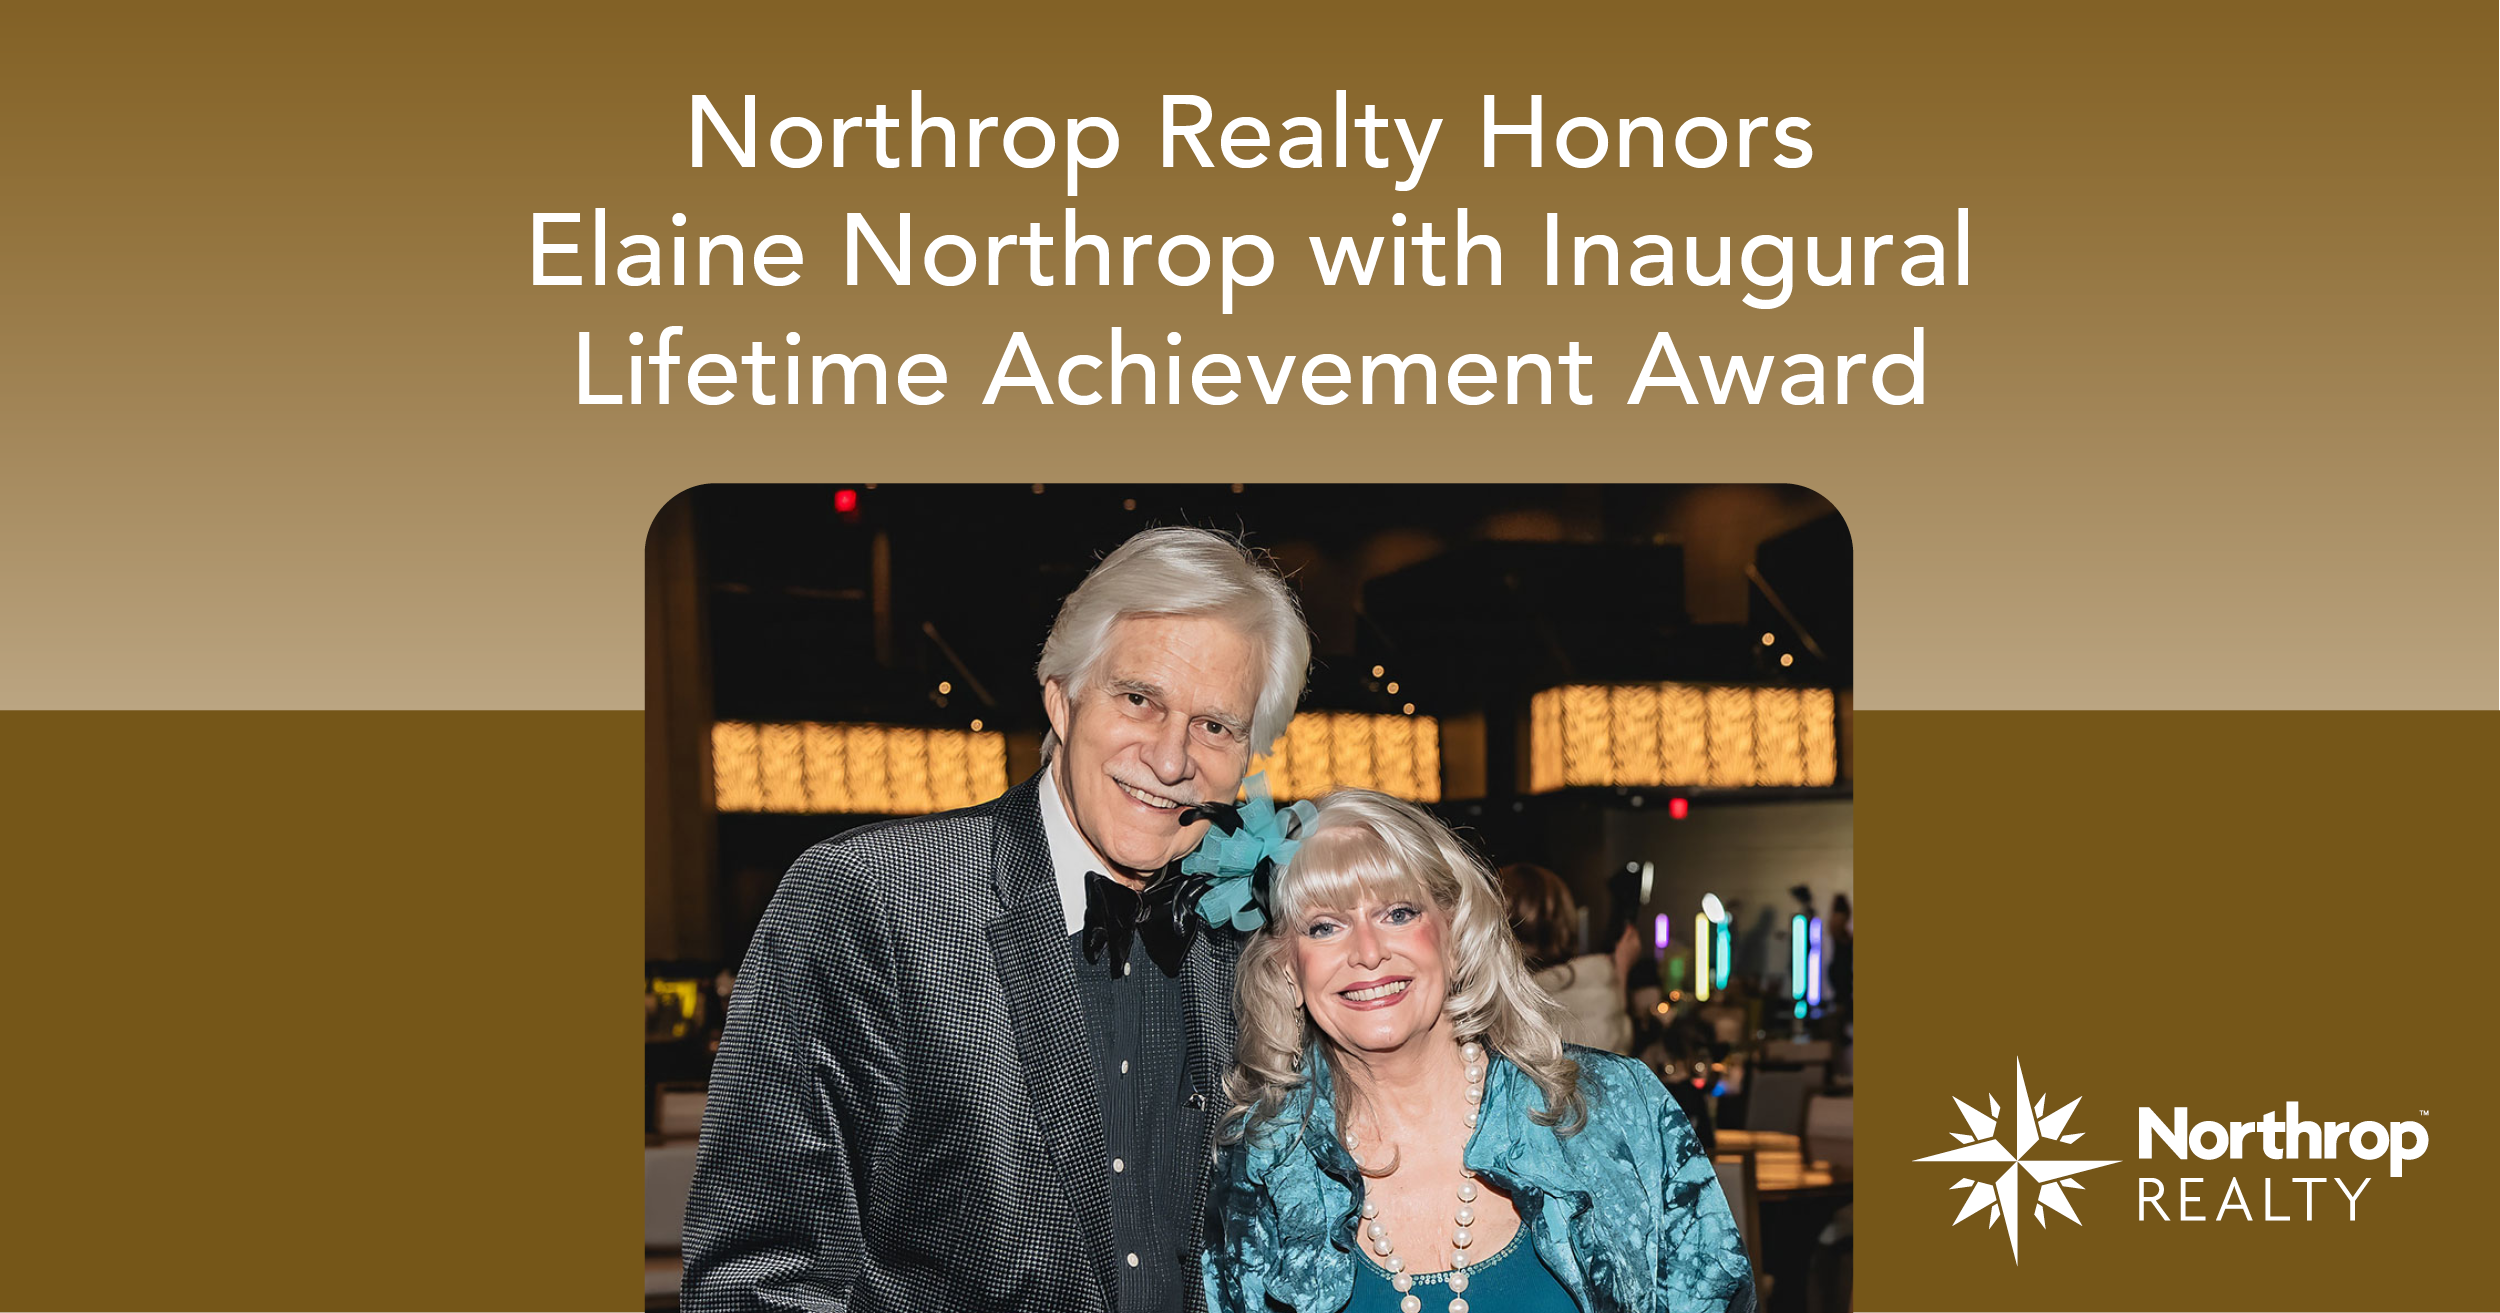 Northrop Realty Honors Elaine Northrop with Inaugural Lifetime Achievement Award